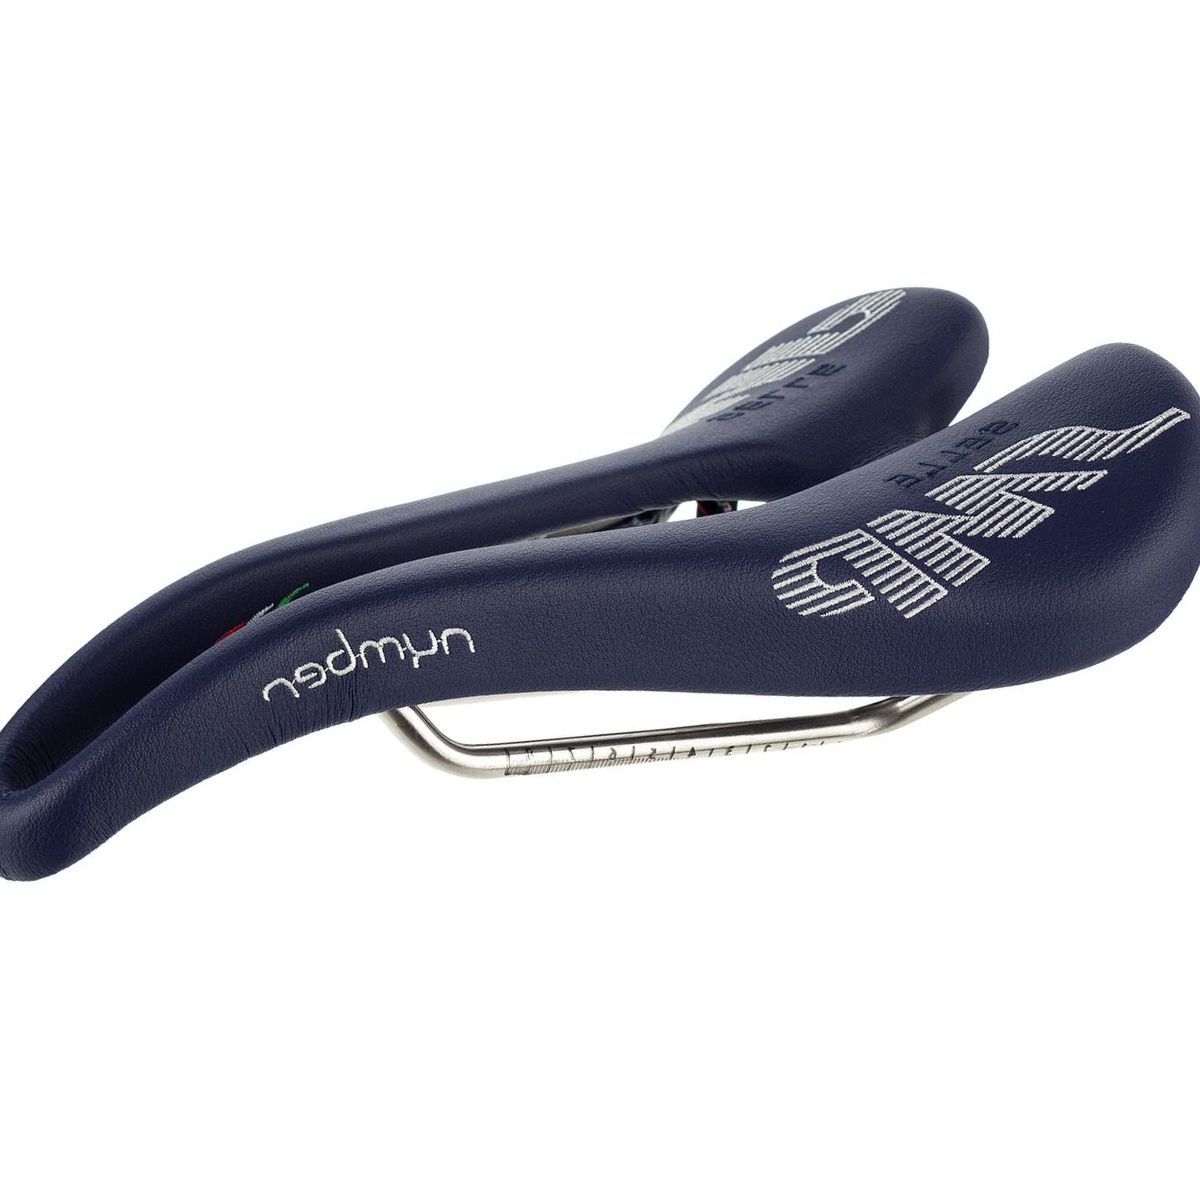 Selle SMP Nymber Saddle - Men's